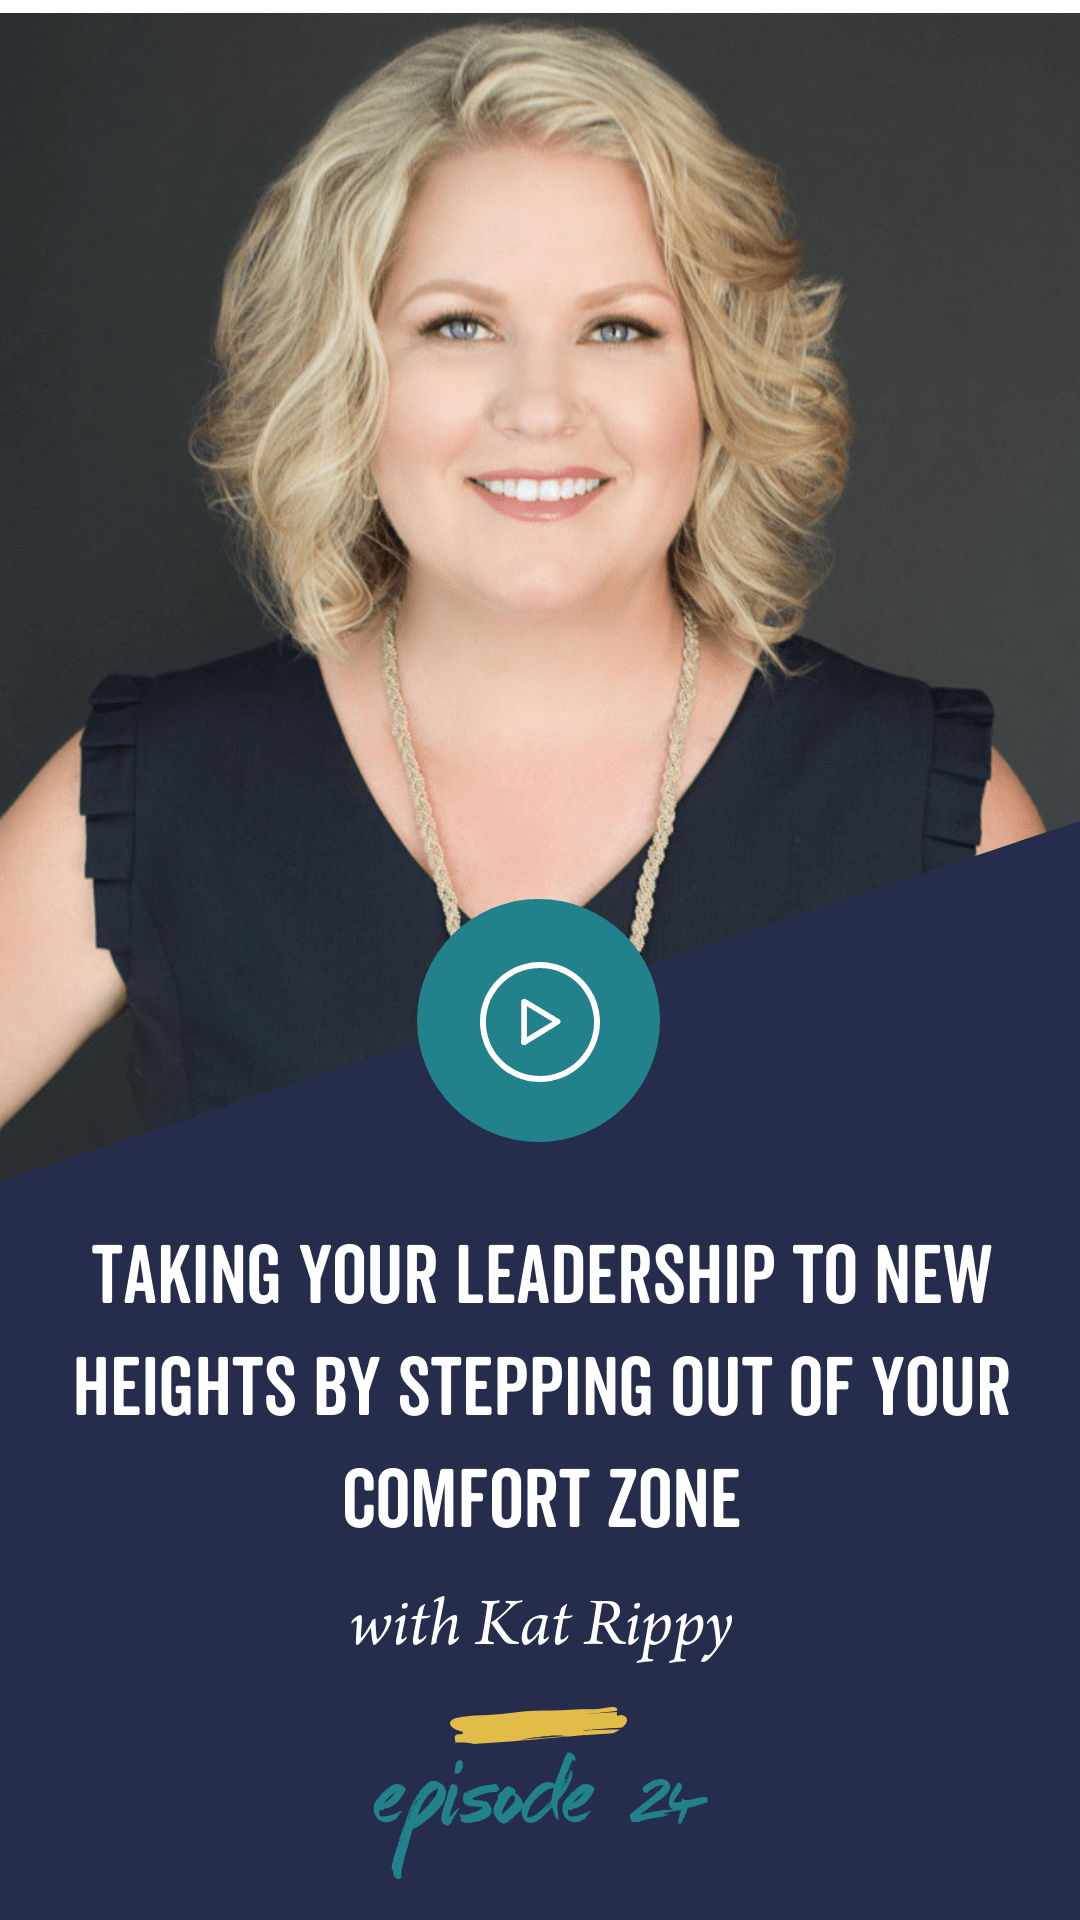 Episode 27: Taking your leadership to new heights by stepping out of your comfort zone